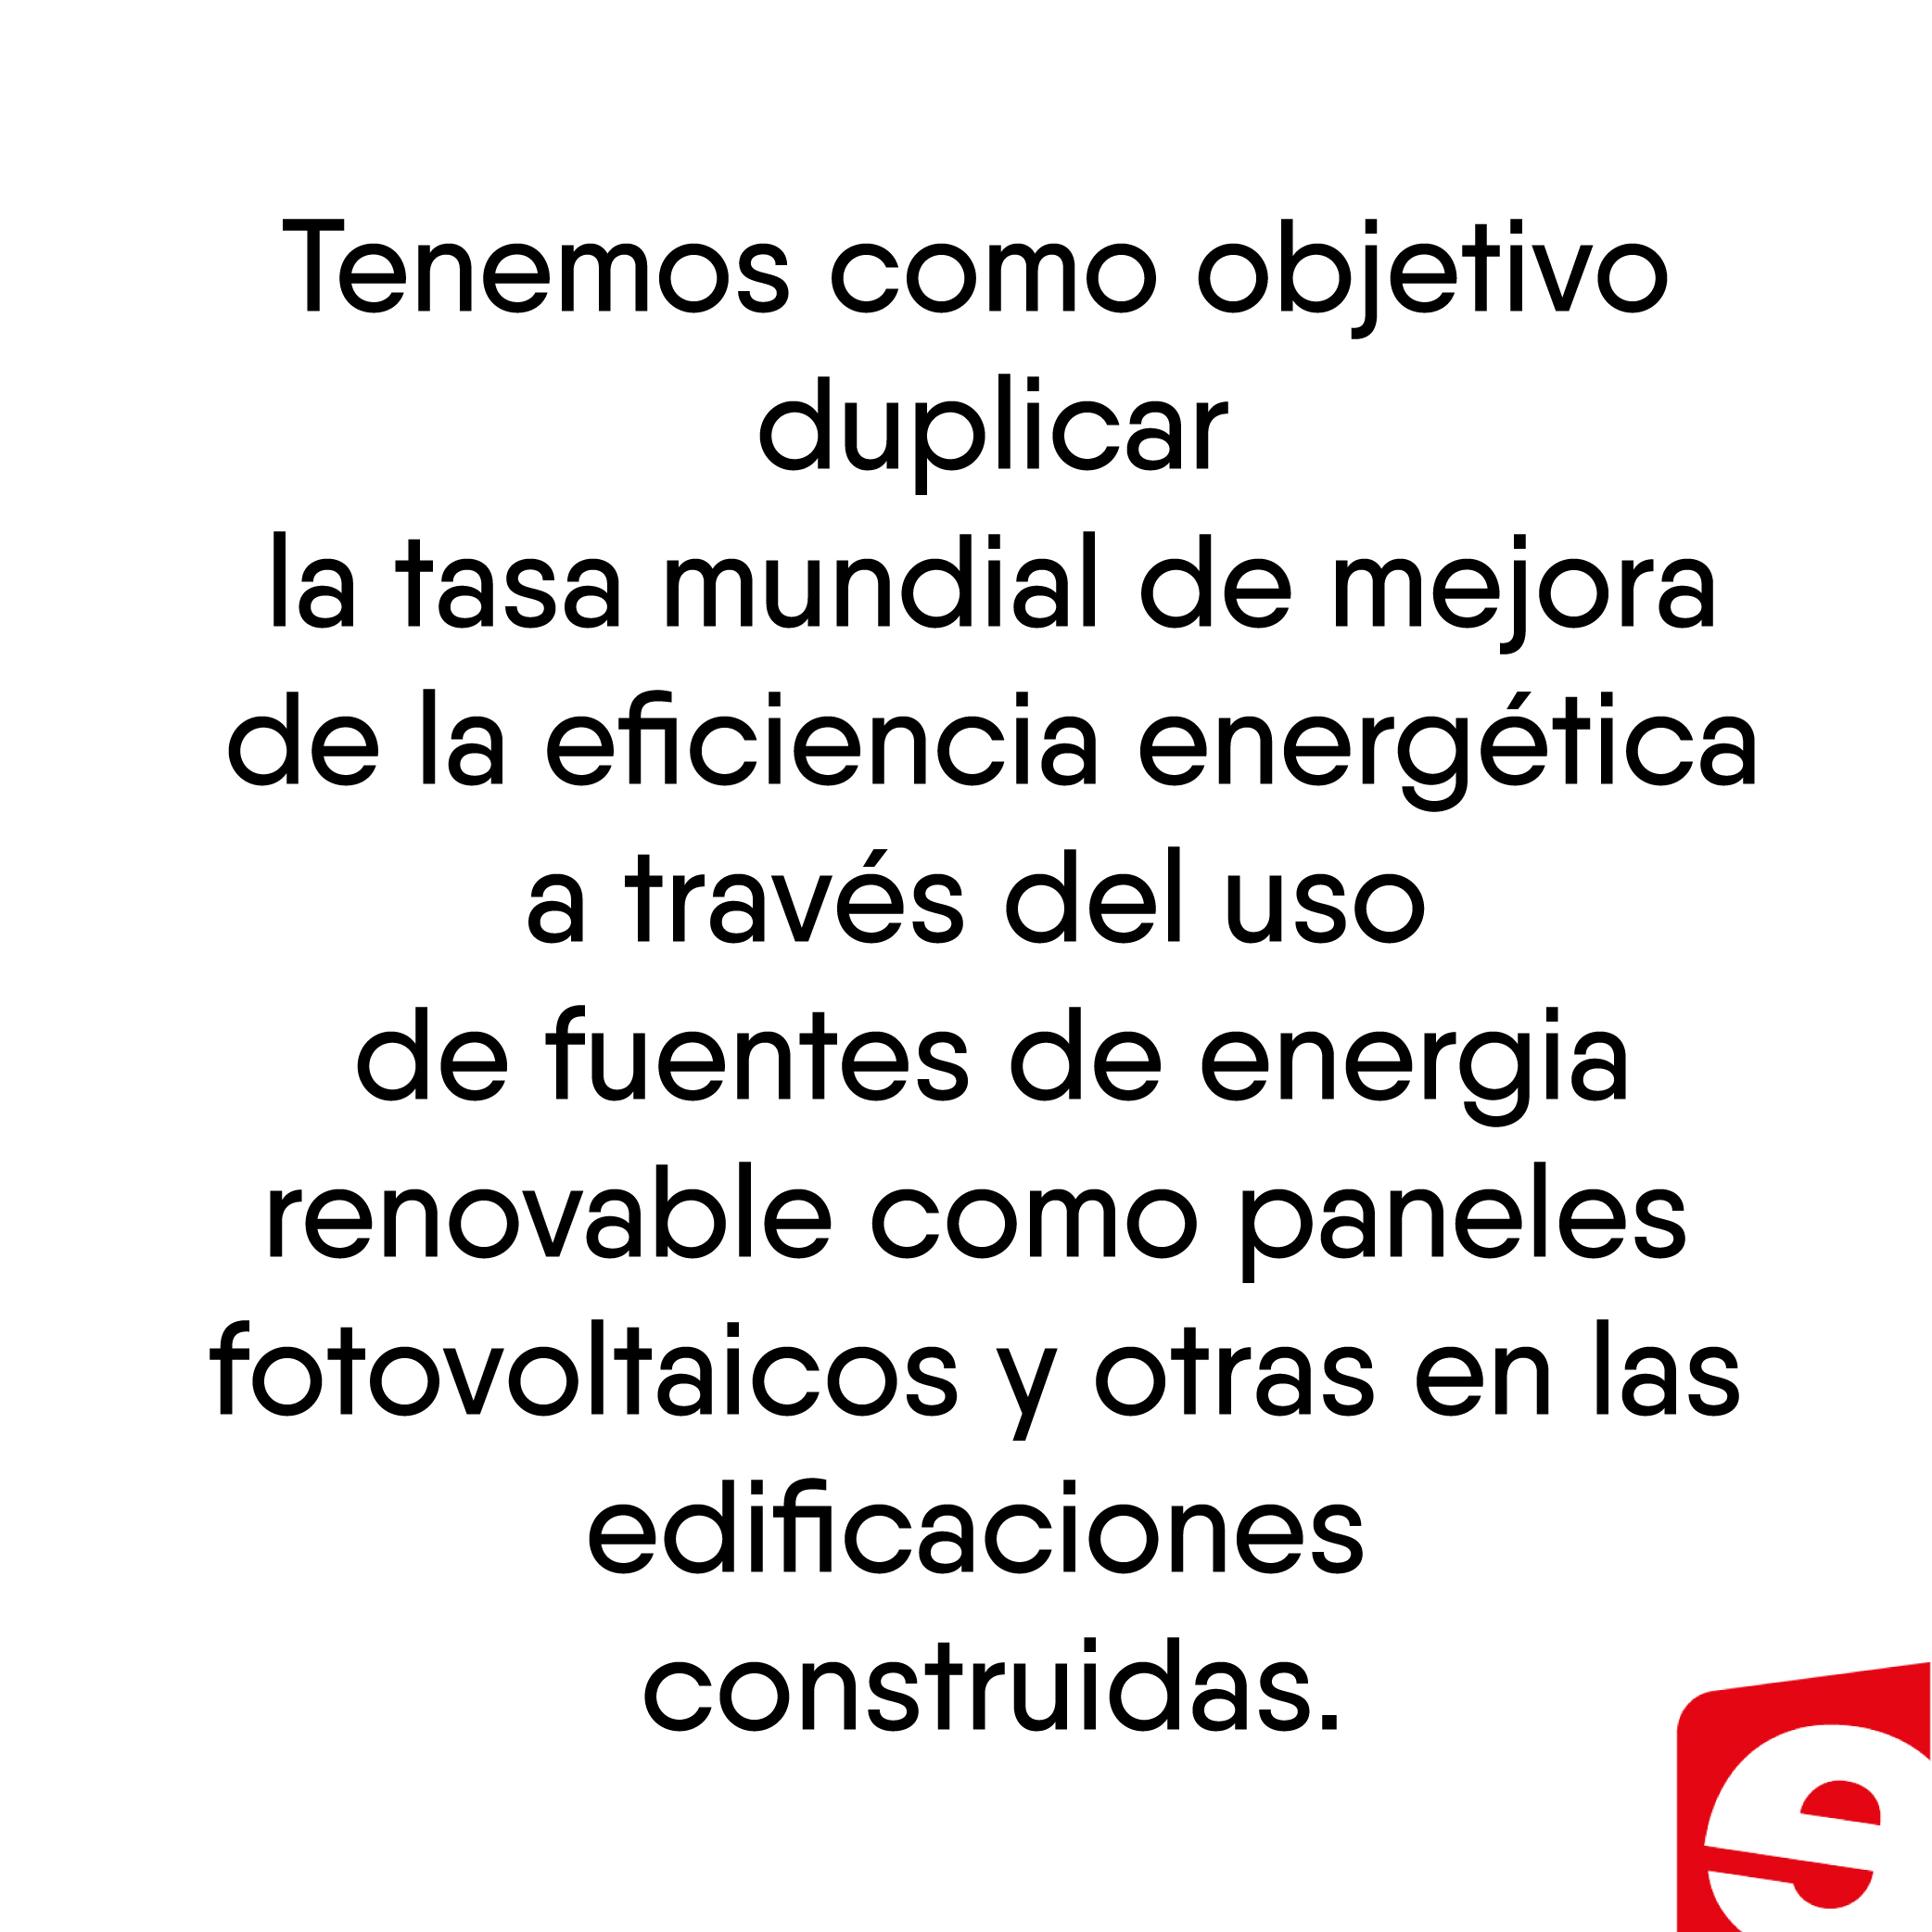 ENERGIA ODS 7-01